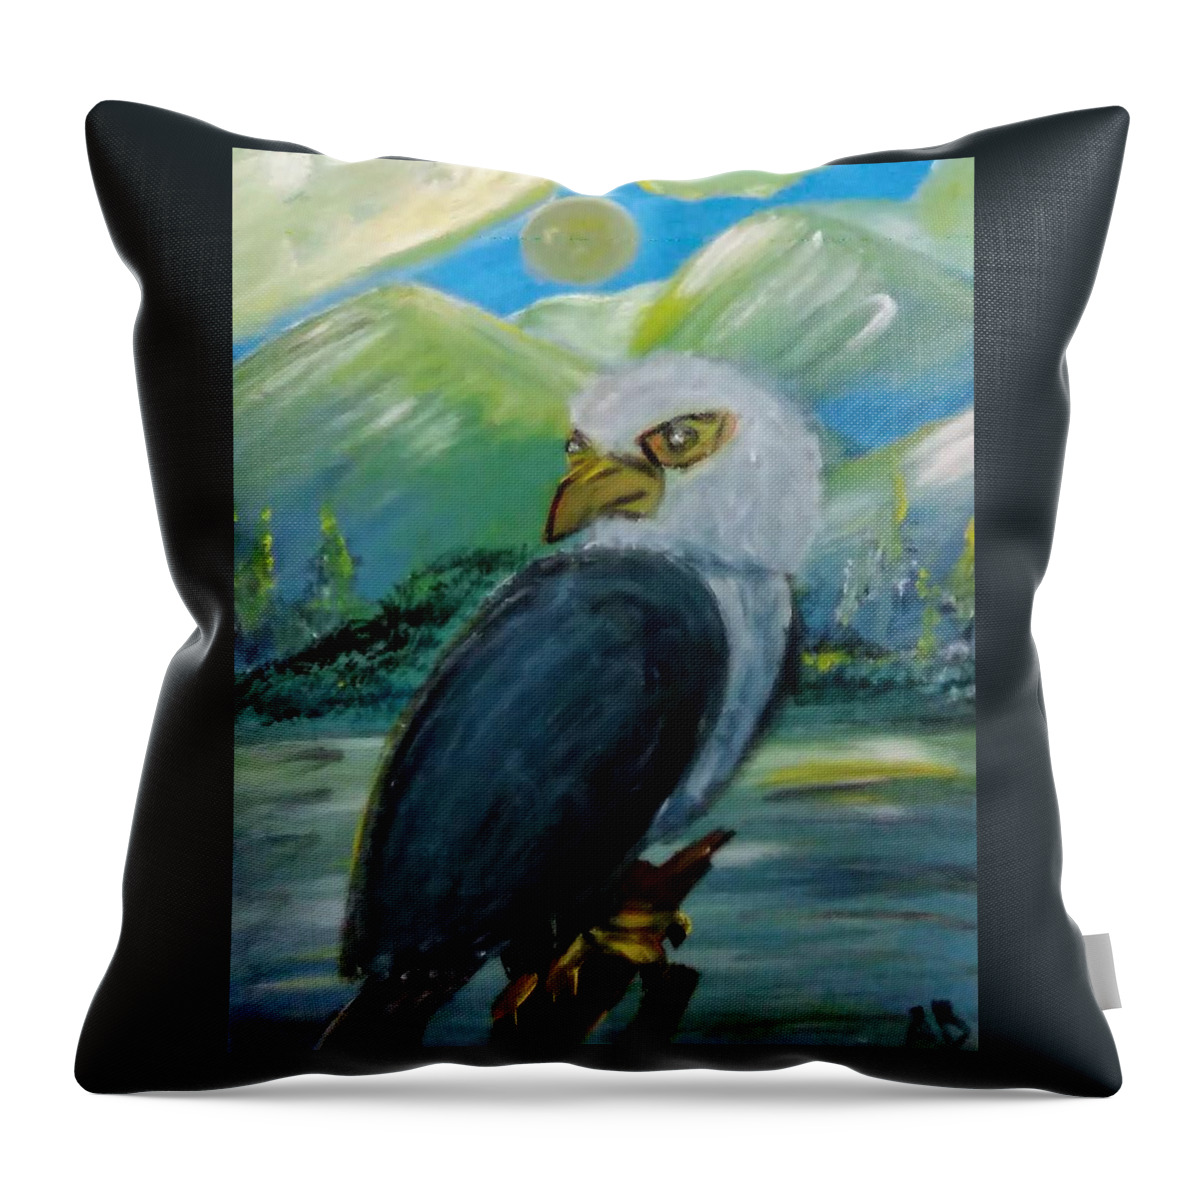 Eagles Throw Pillow featuring the painting Perched Bald Eagle by Andrew Blitman